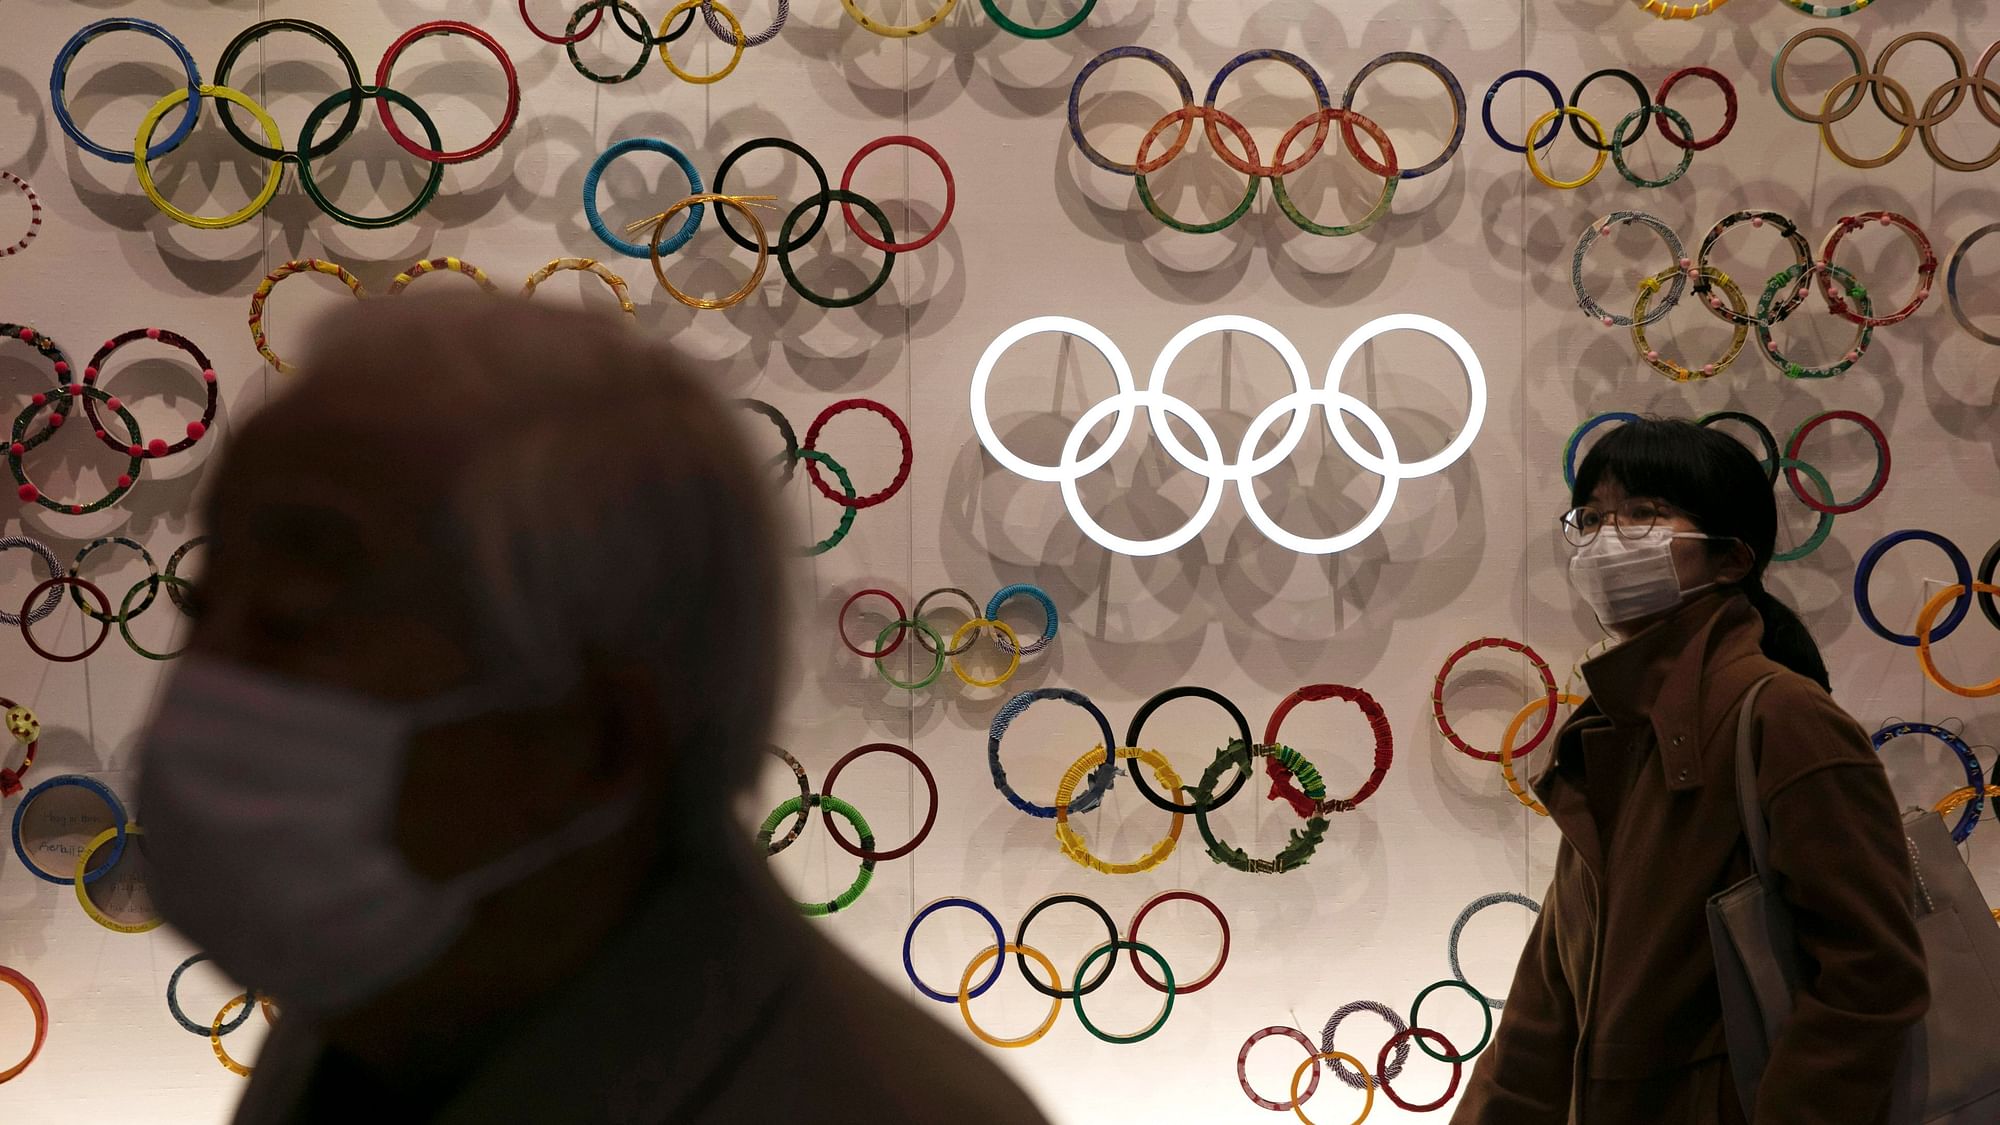  Japan is officially spending $12.6 billion to organise the Olympics.